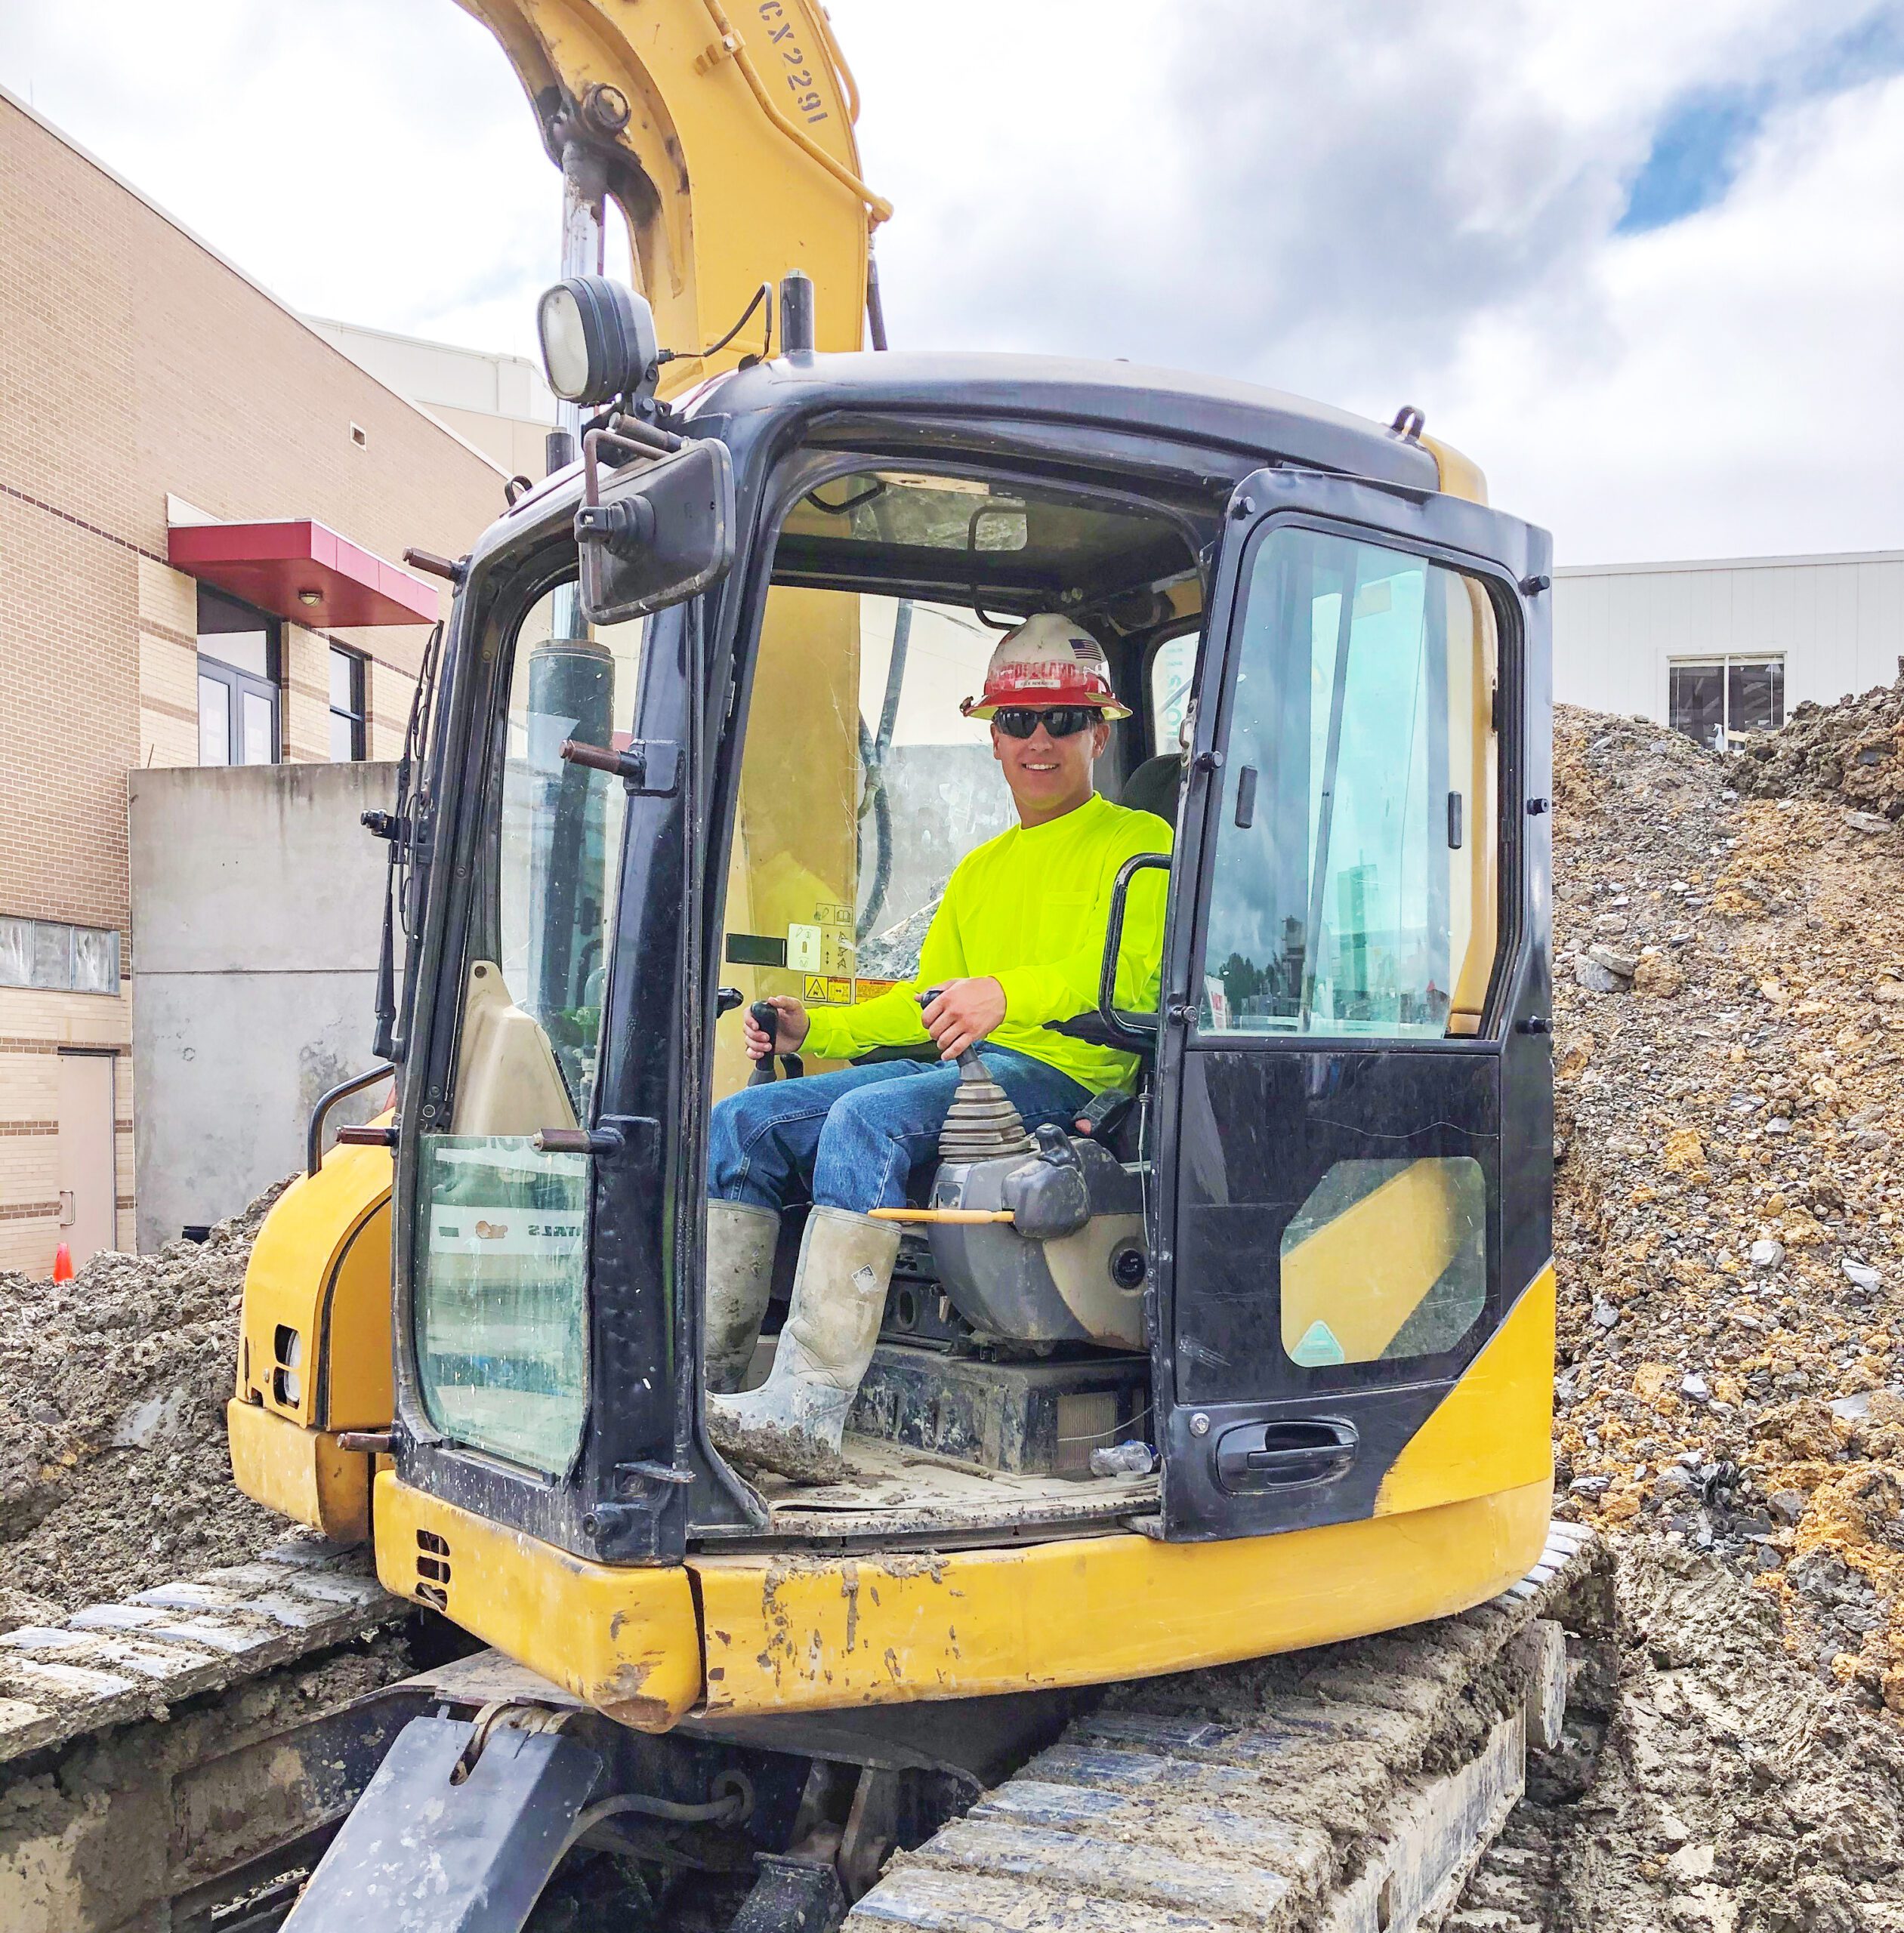 A man sitting in a yellow excavator.